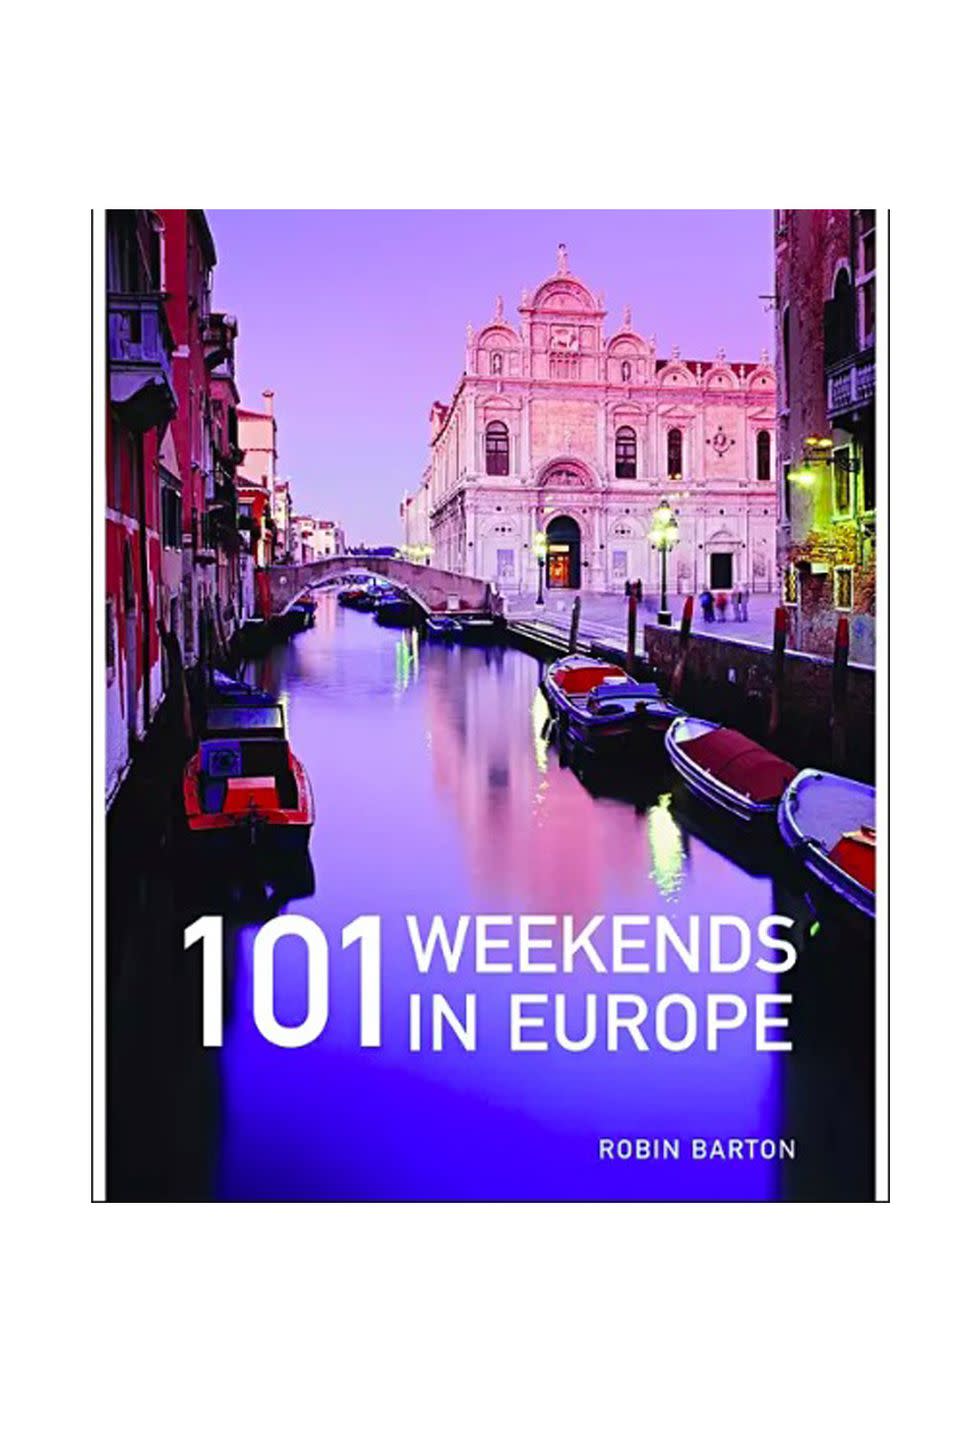 Travel gifts - 101 Weekends in Europe Book